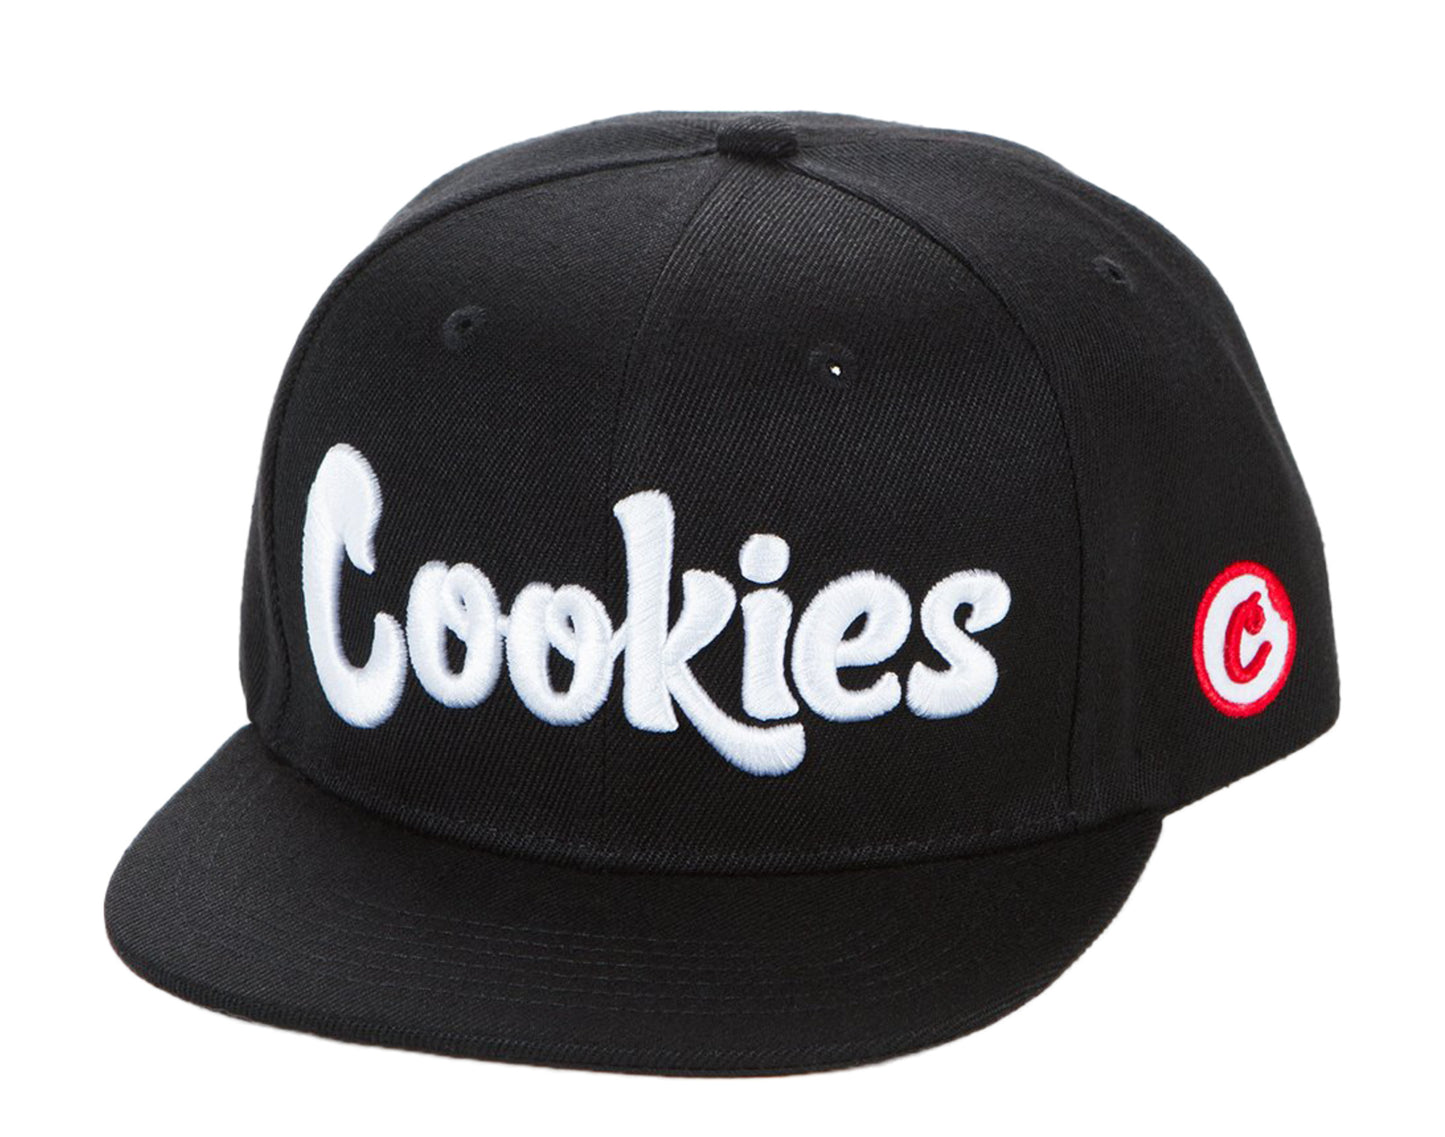 Cookies Glaciers Of Ice Embroidered Logo Black/White Snapback 1546X4336-BKW